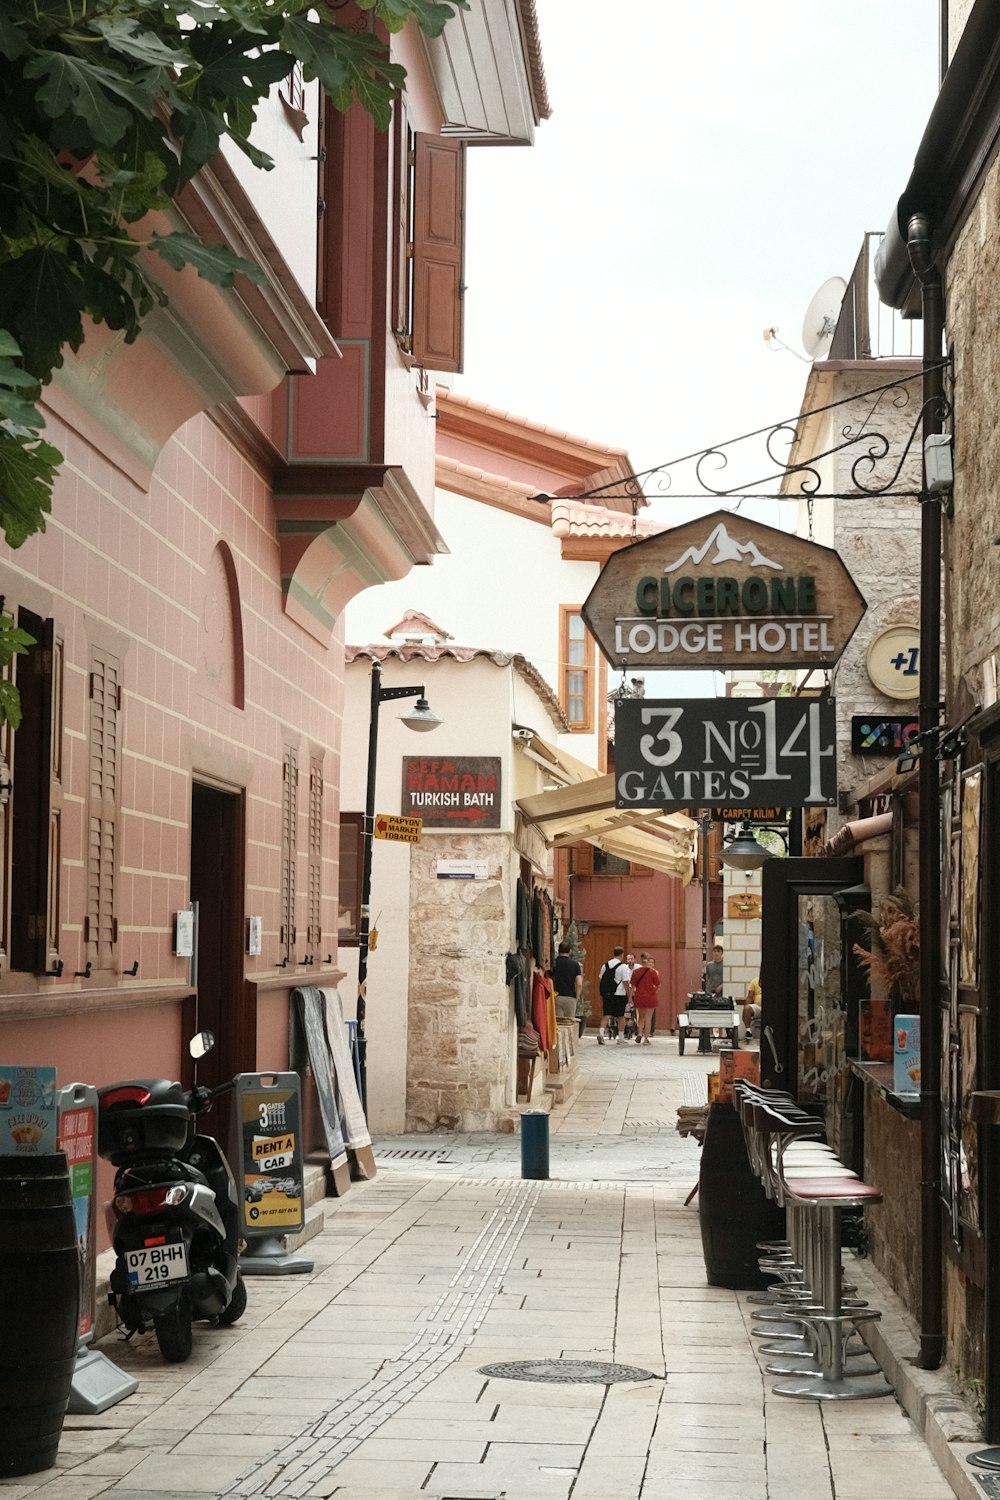 a narrow city street with a sign for a boutique